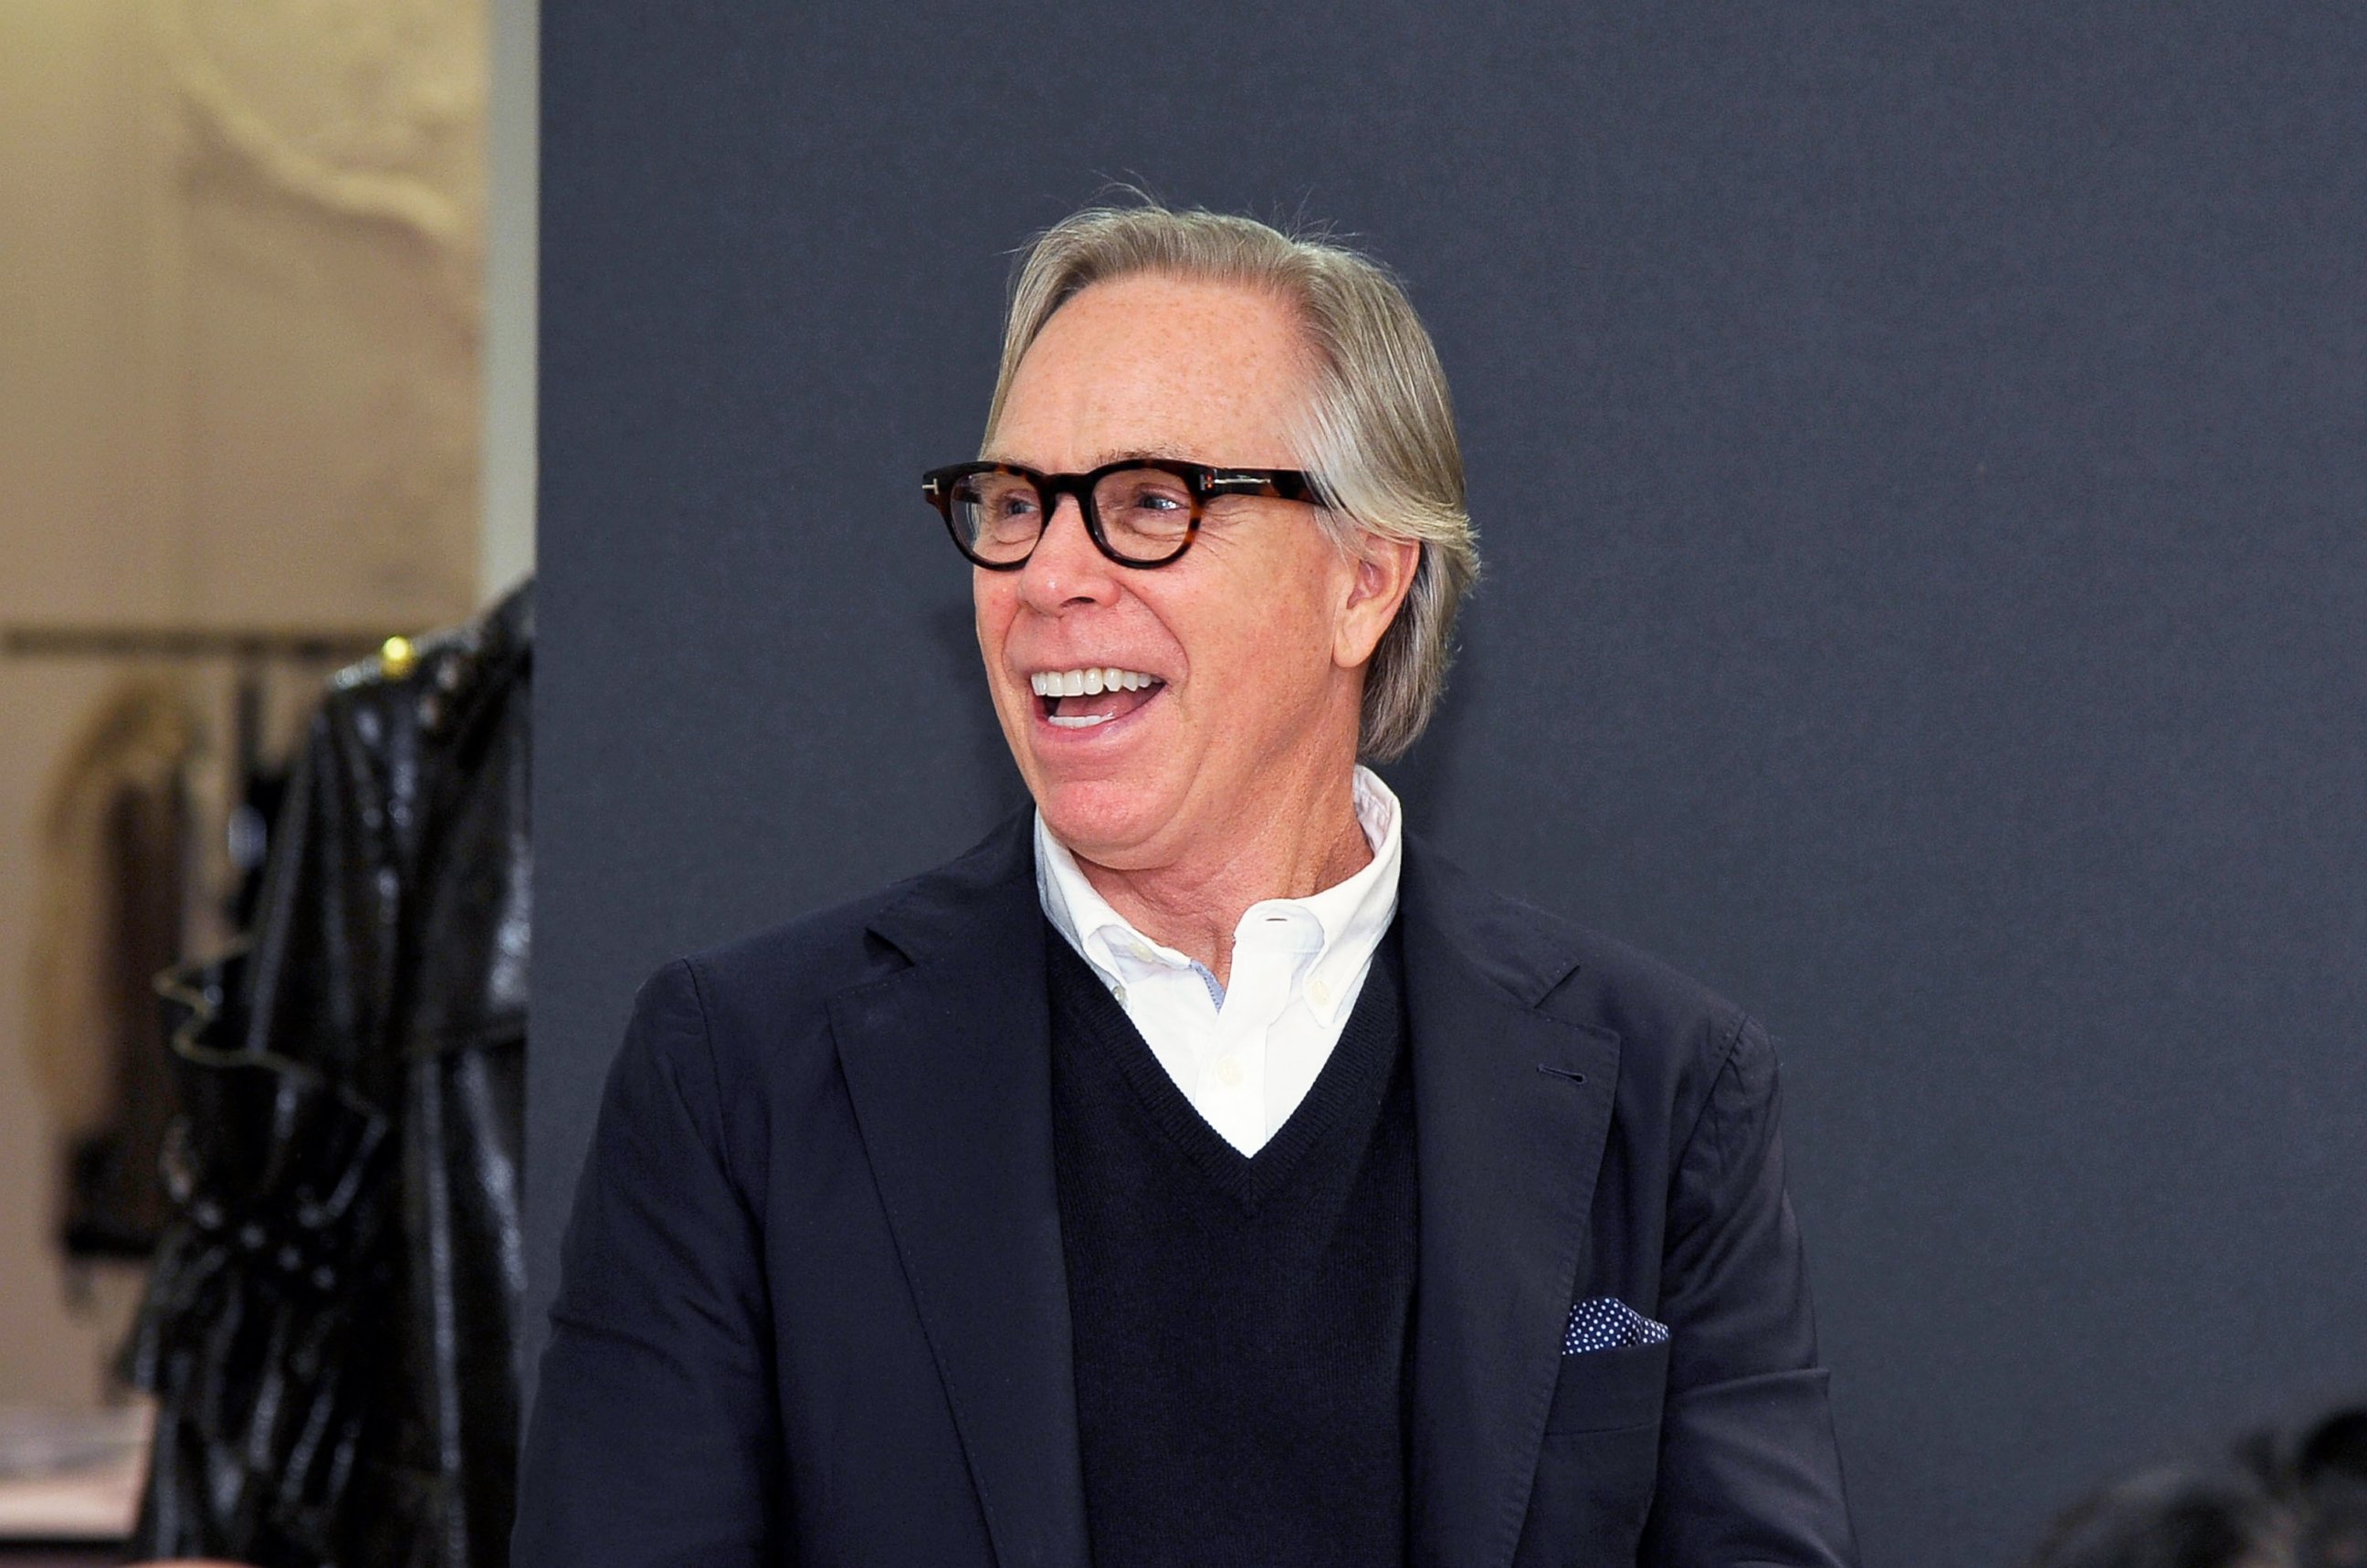 PHOTO: Tommy Hilfiger attends Dee Ocleppo PA at Saks Fifth Avenue Beverly Hills, Oct. 17, 2014, in Beverly Hills, Calif.